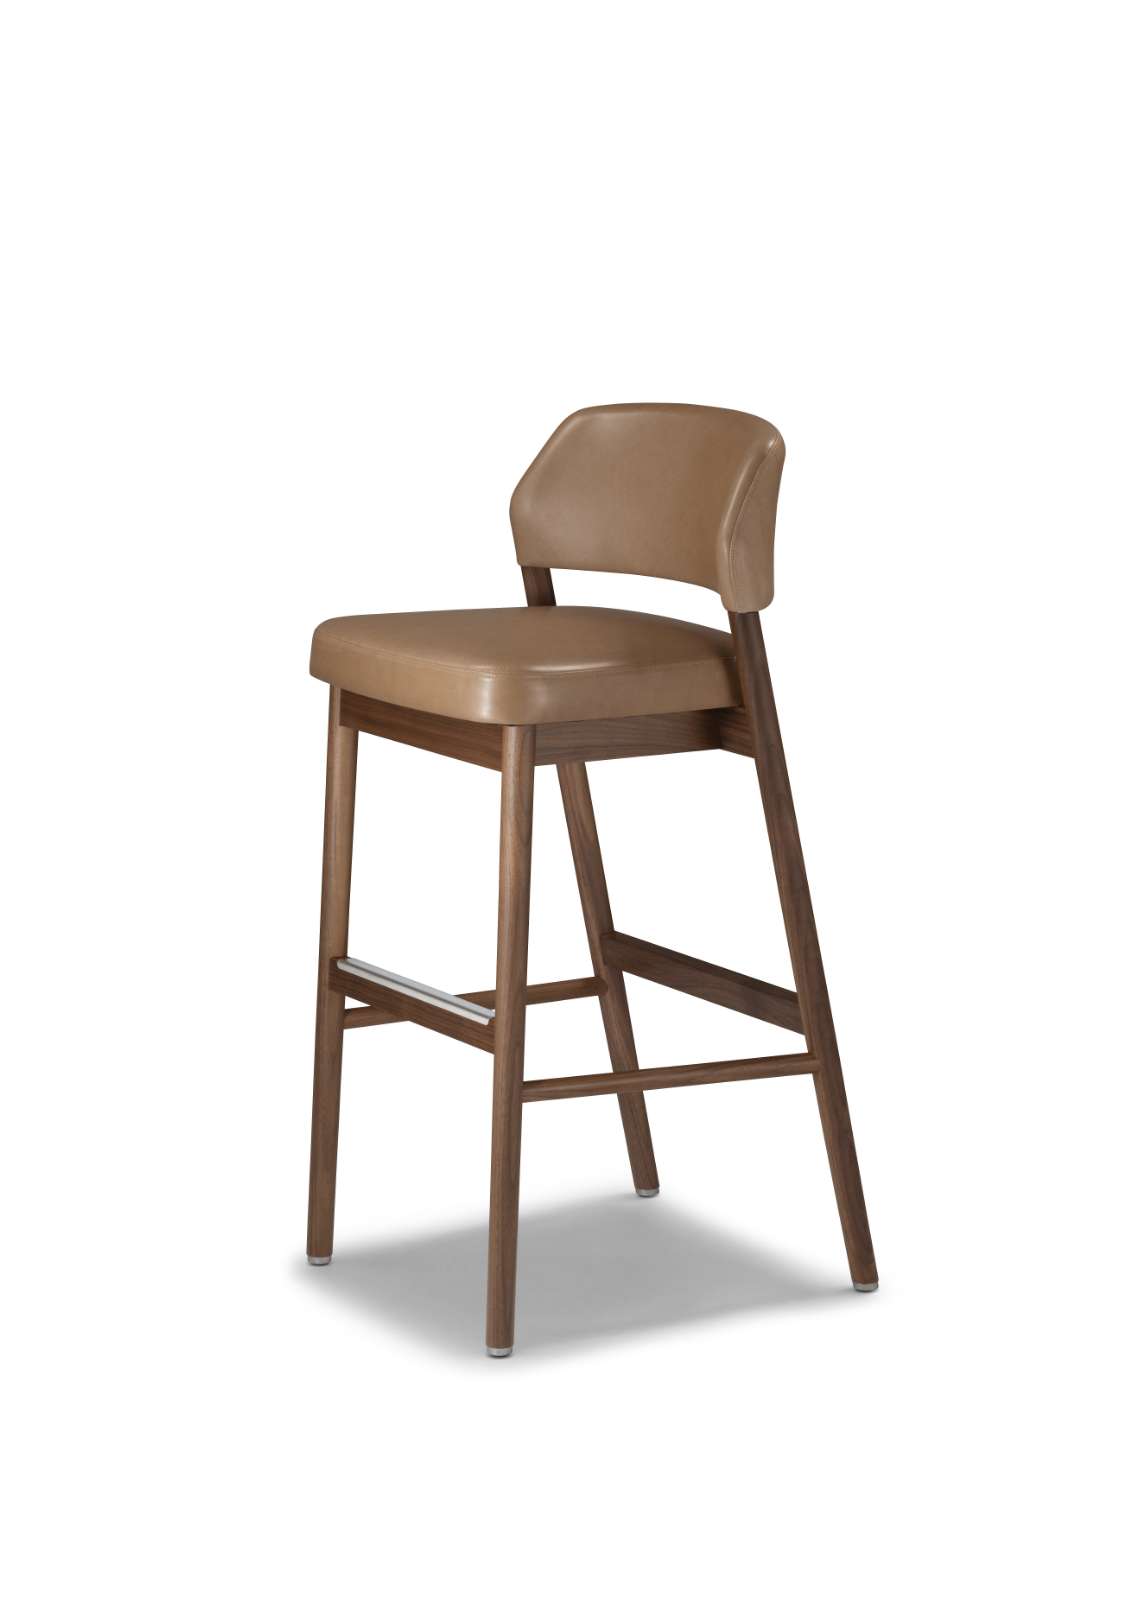 TANT-TANT COUNTER CHAIR